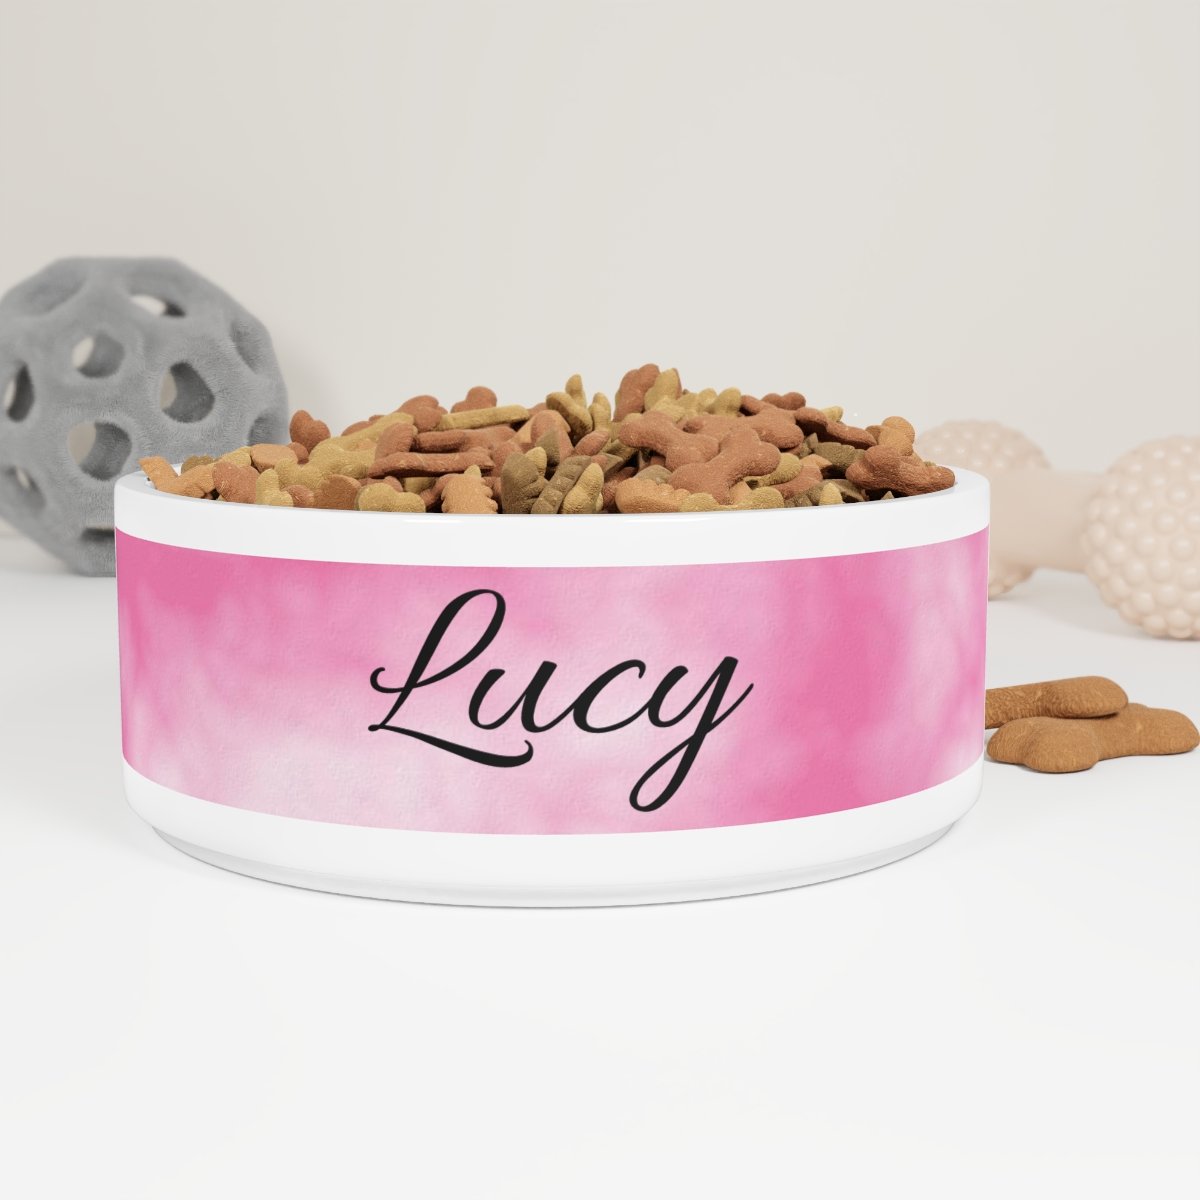 Personalized Small Dog Food Bowls - Dog Breeds